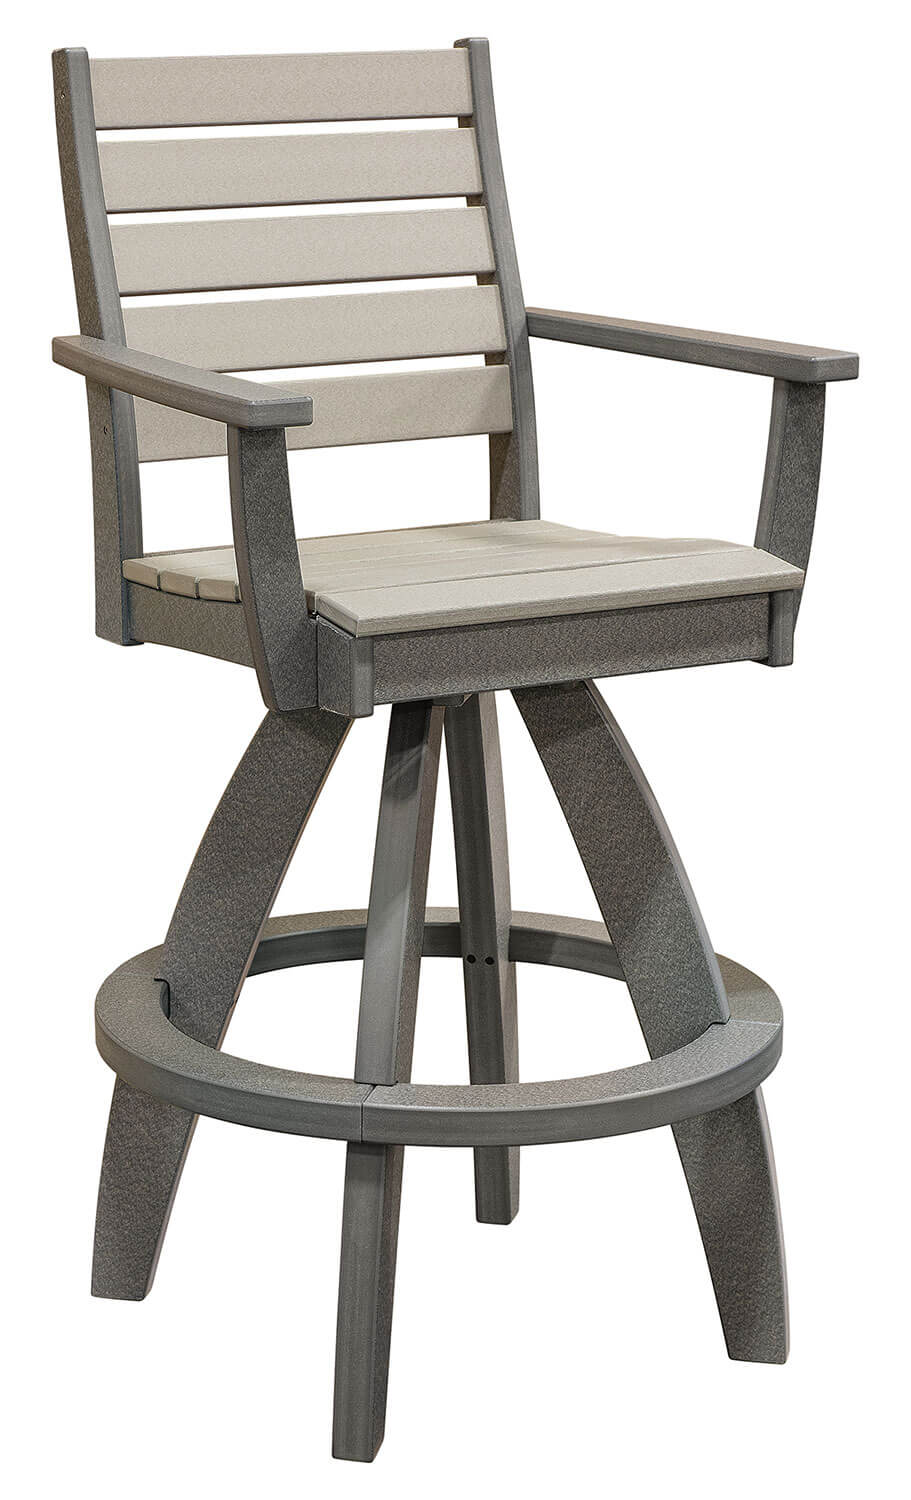 EC Woods Freeport Outdoor Poly Bar Height Swivel Chair shown in Light Gray and Dark Gray